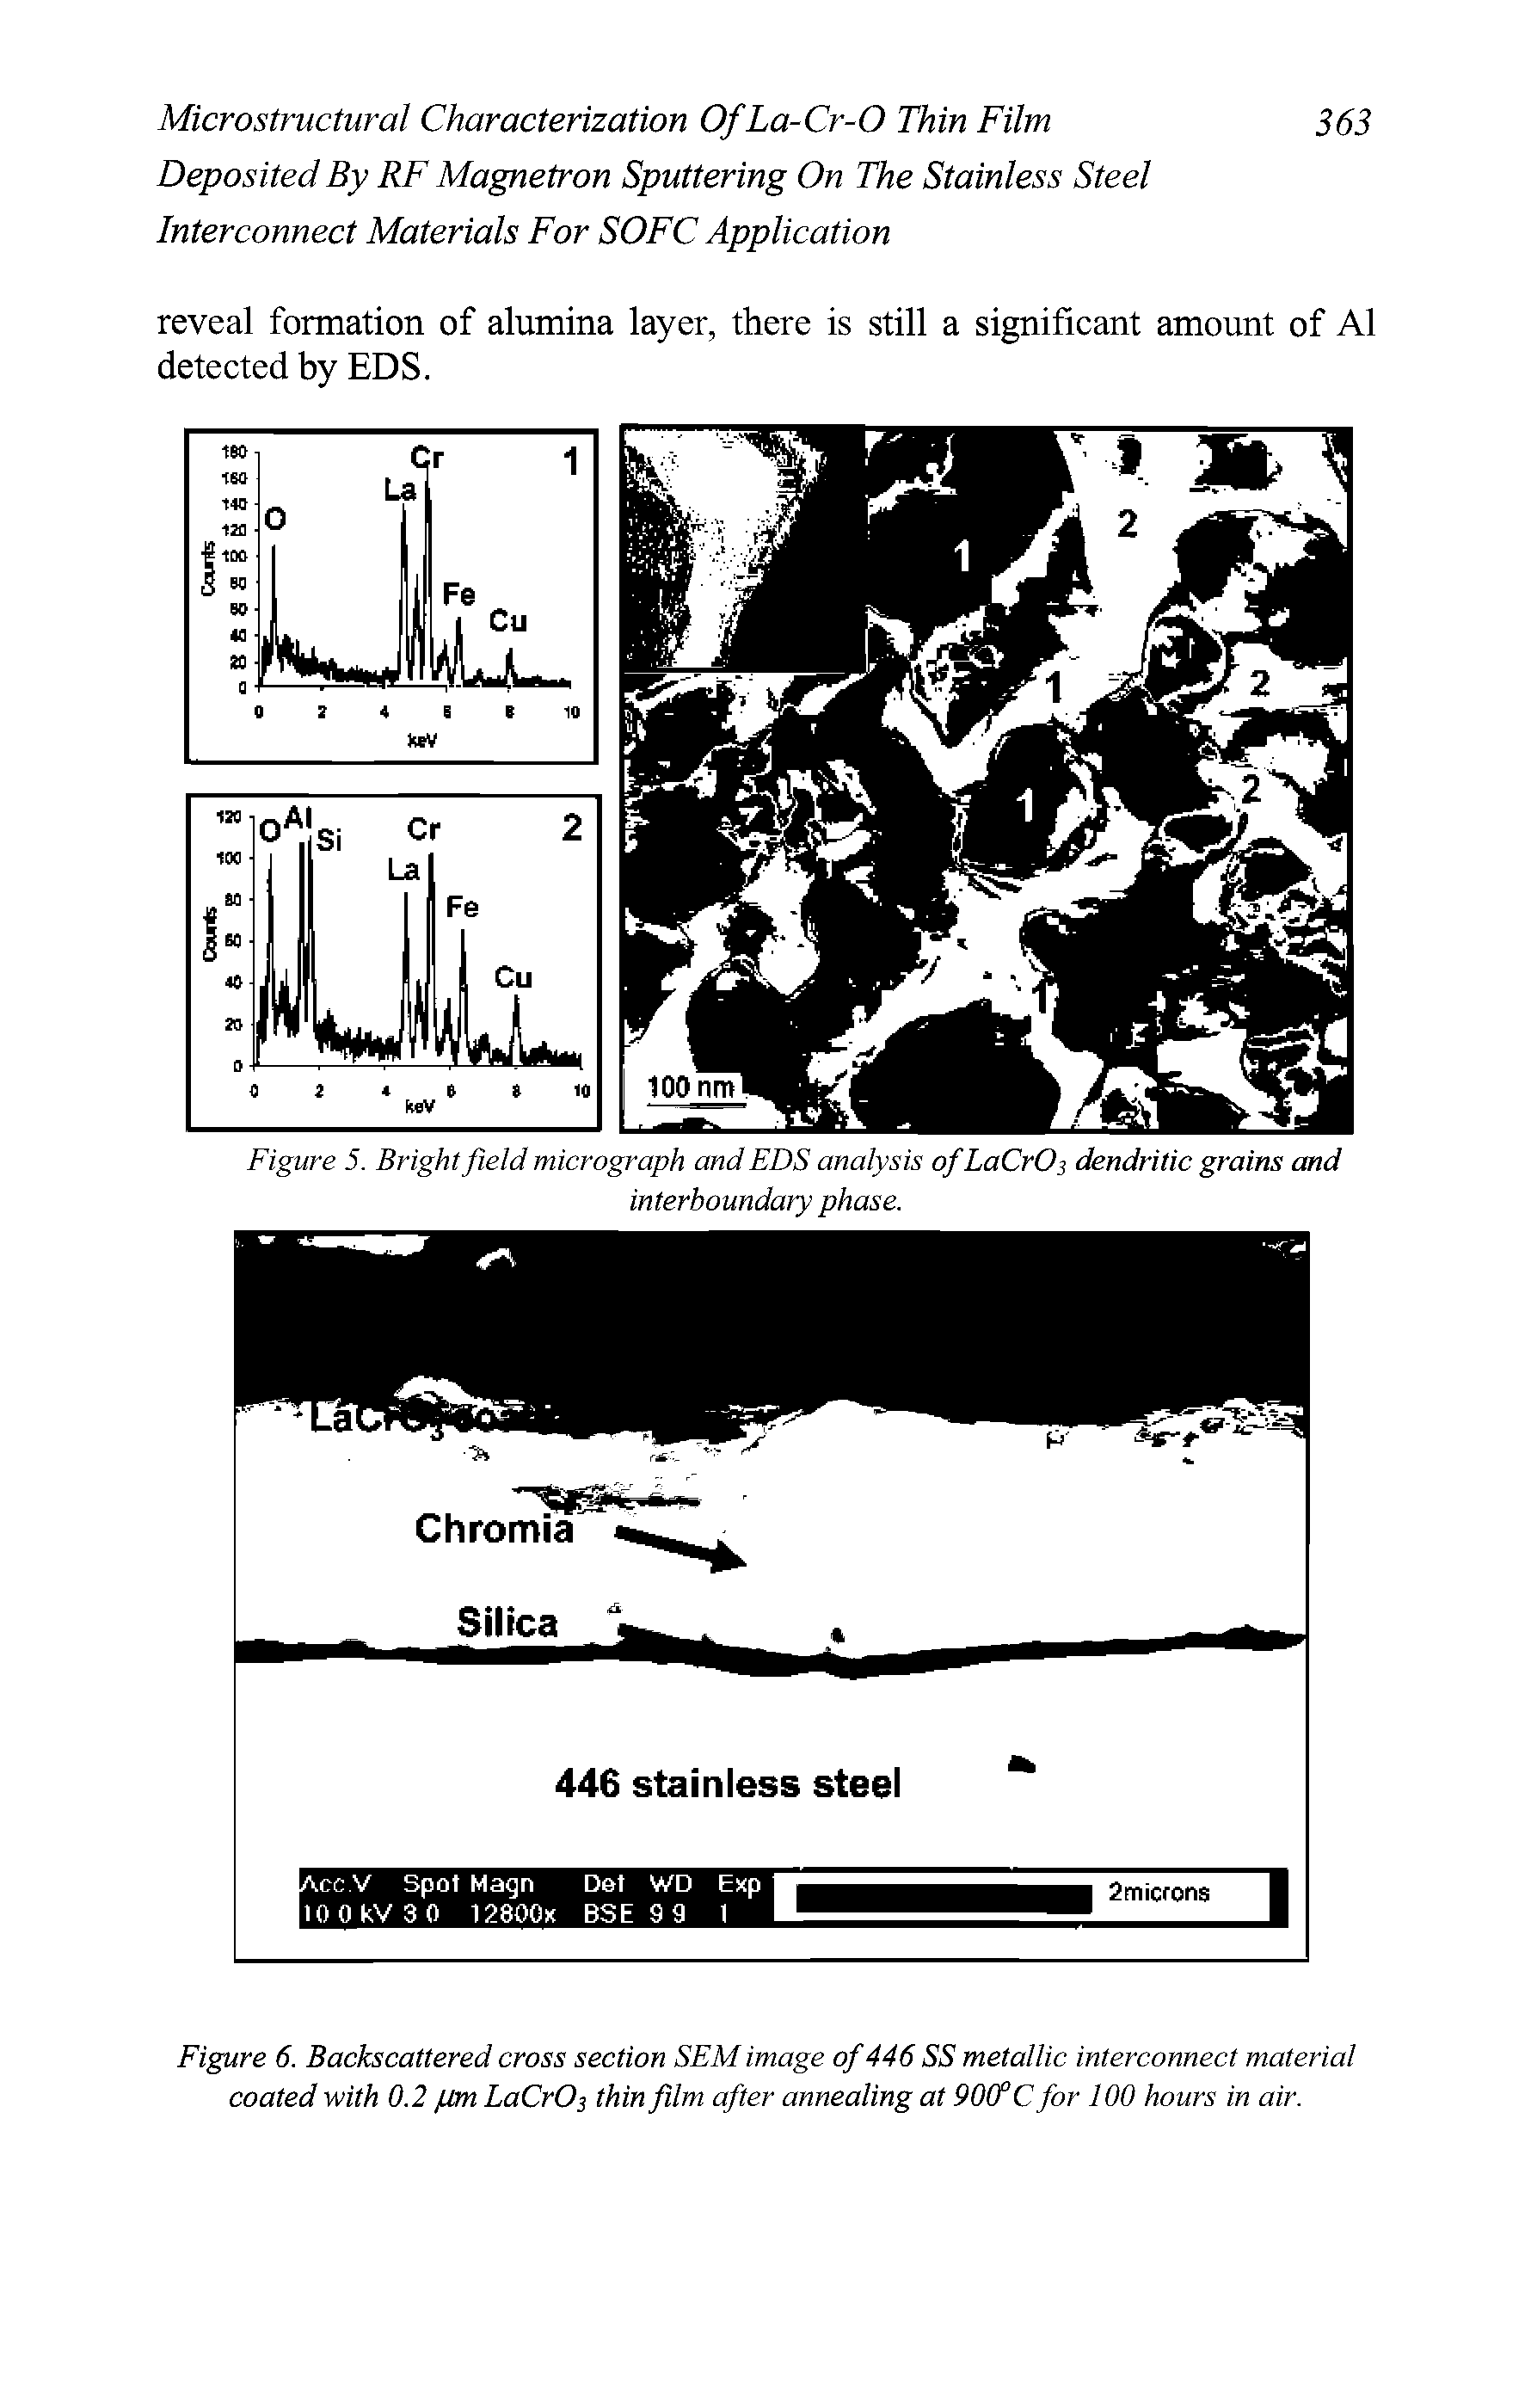 Figure 6. Backscattered cross section SEM image of446 SS metallic interconnect material coated with 0.2 pm LaCrOs thin film after annealing at 90(f C for 100 hours in air.